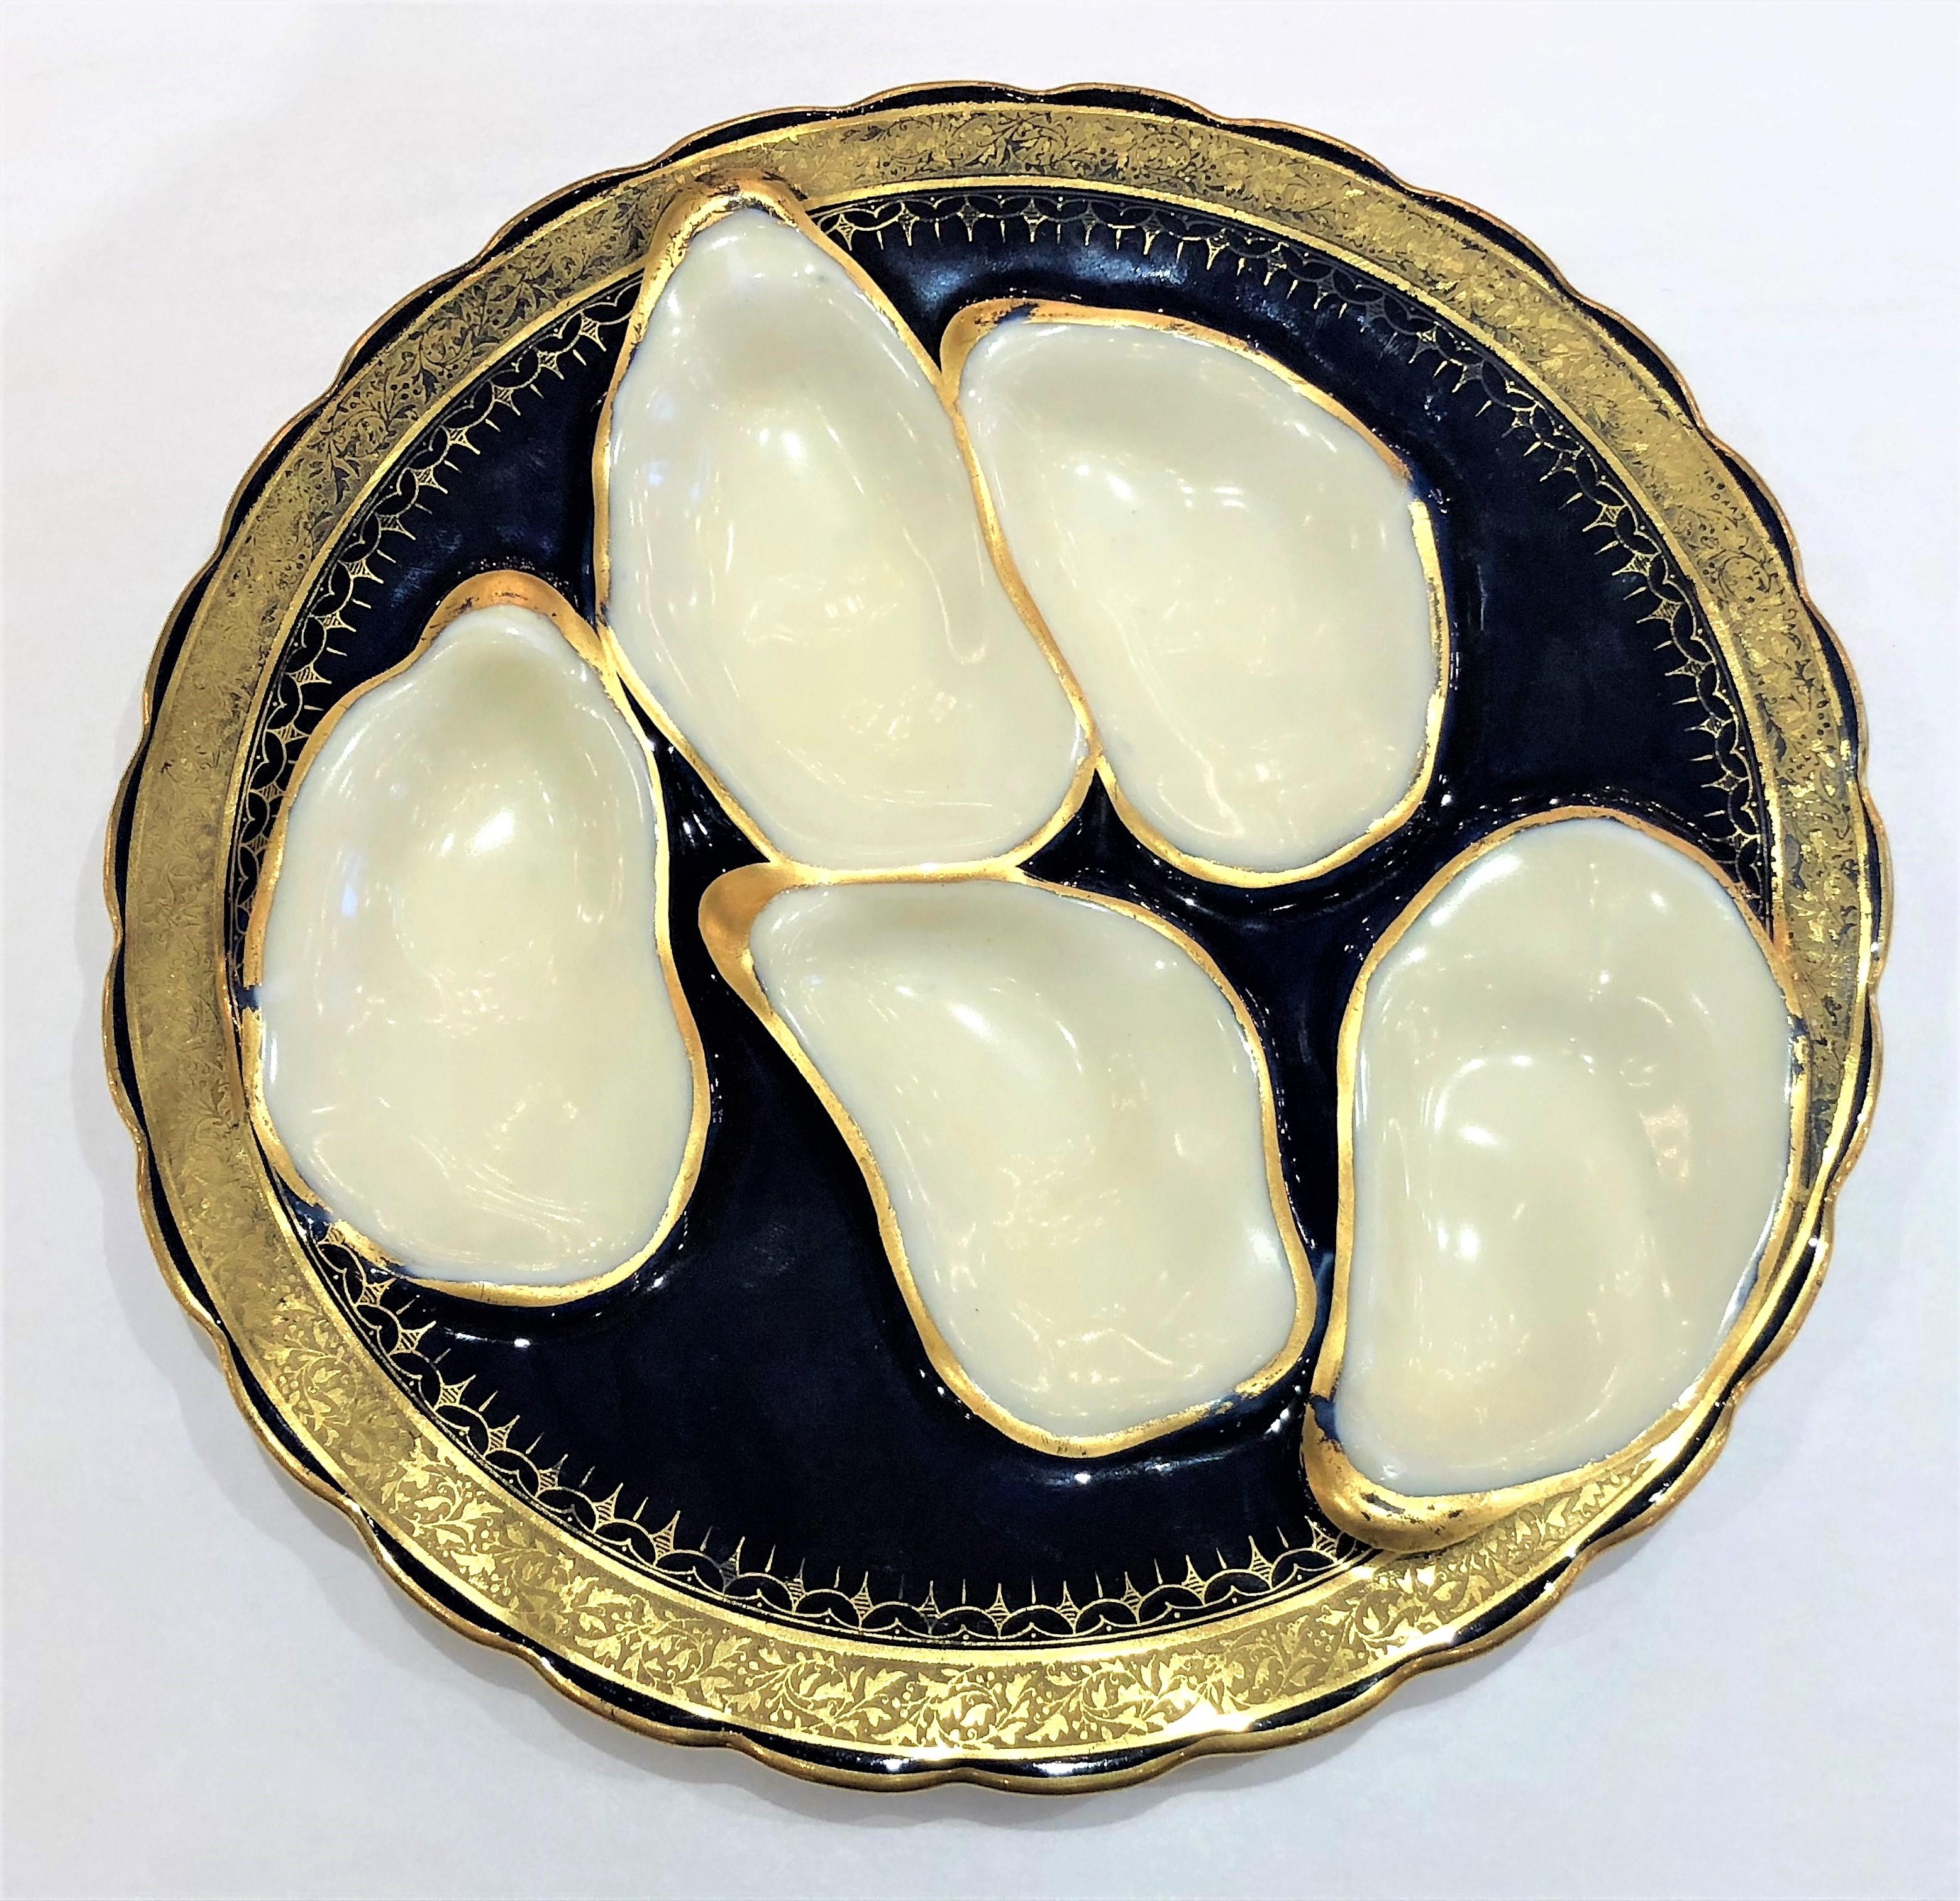 Antique French hand-painted Limoges porcelain oyster plate, circa 1870-1880.